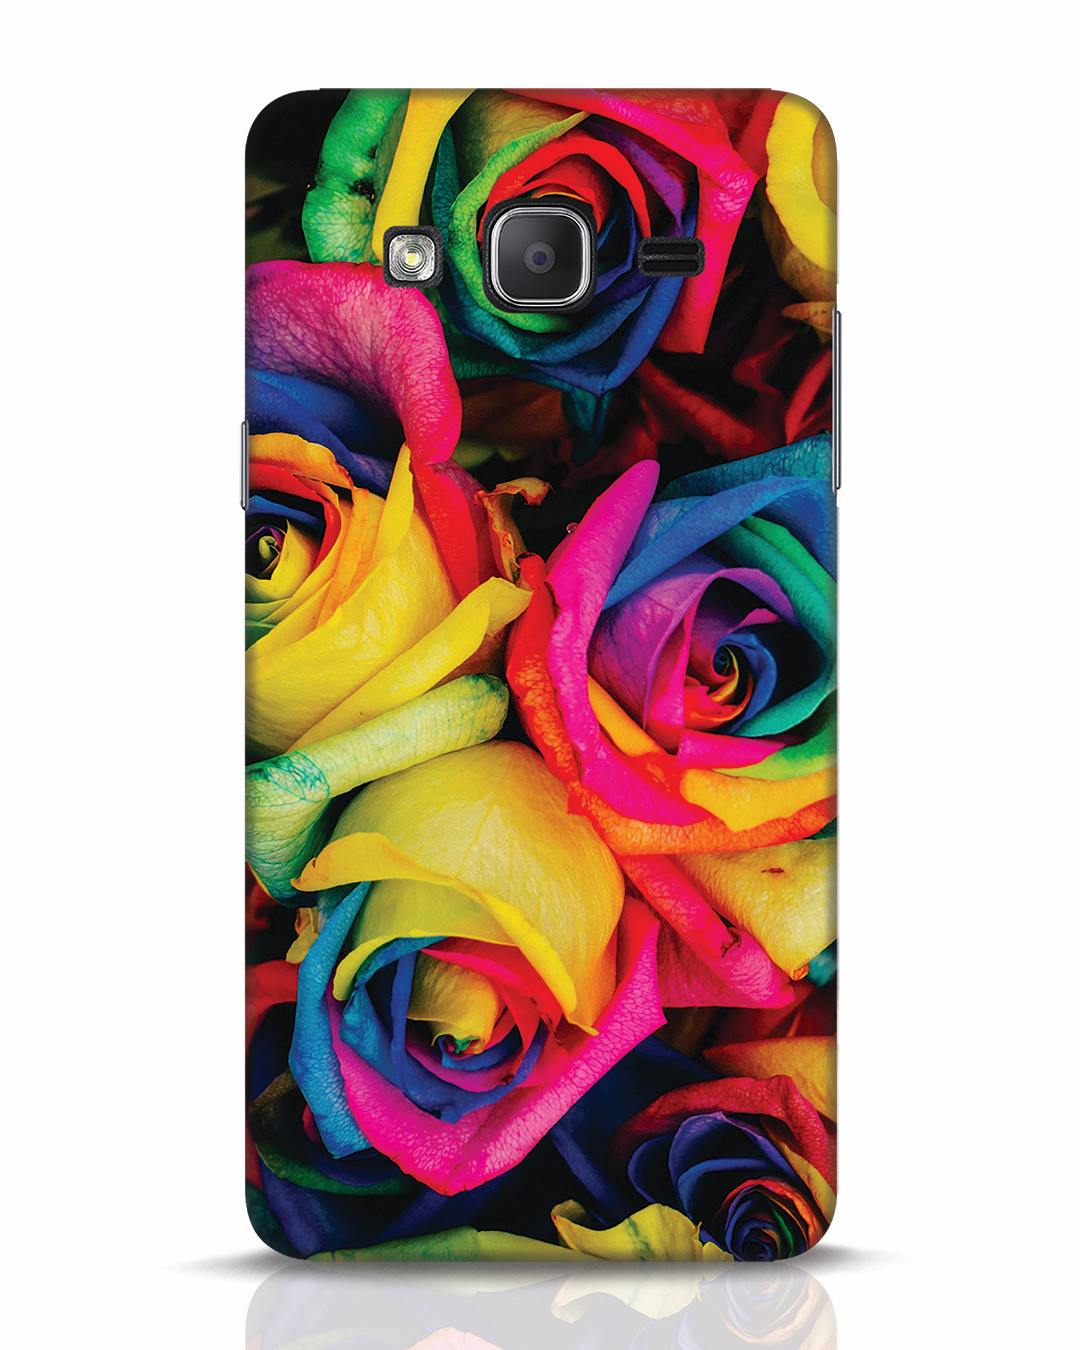 Colorful Rose Samsung Galaxy On7 Mobile Cover Samsung Galaxy On7 Mobile Covers Bewakoof.com